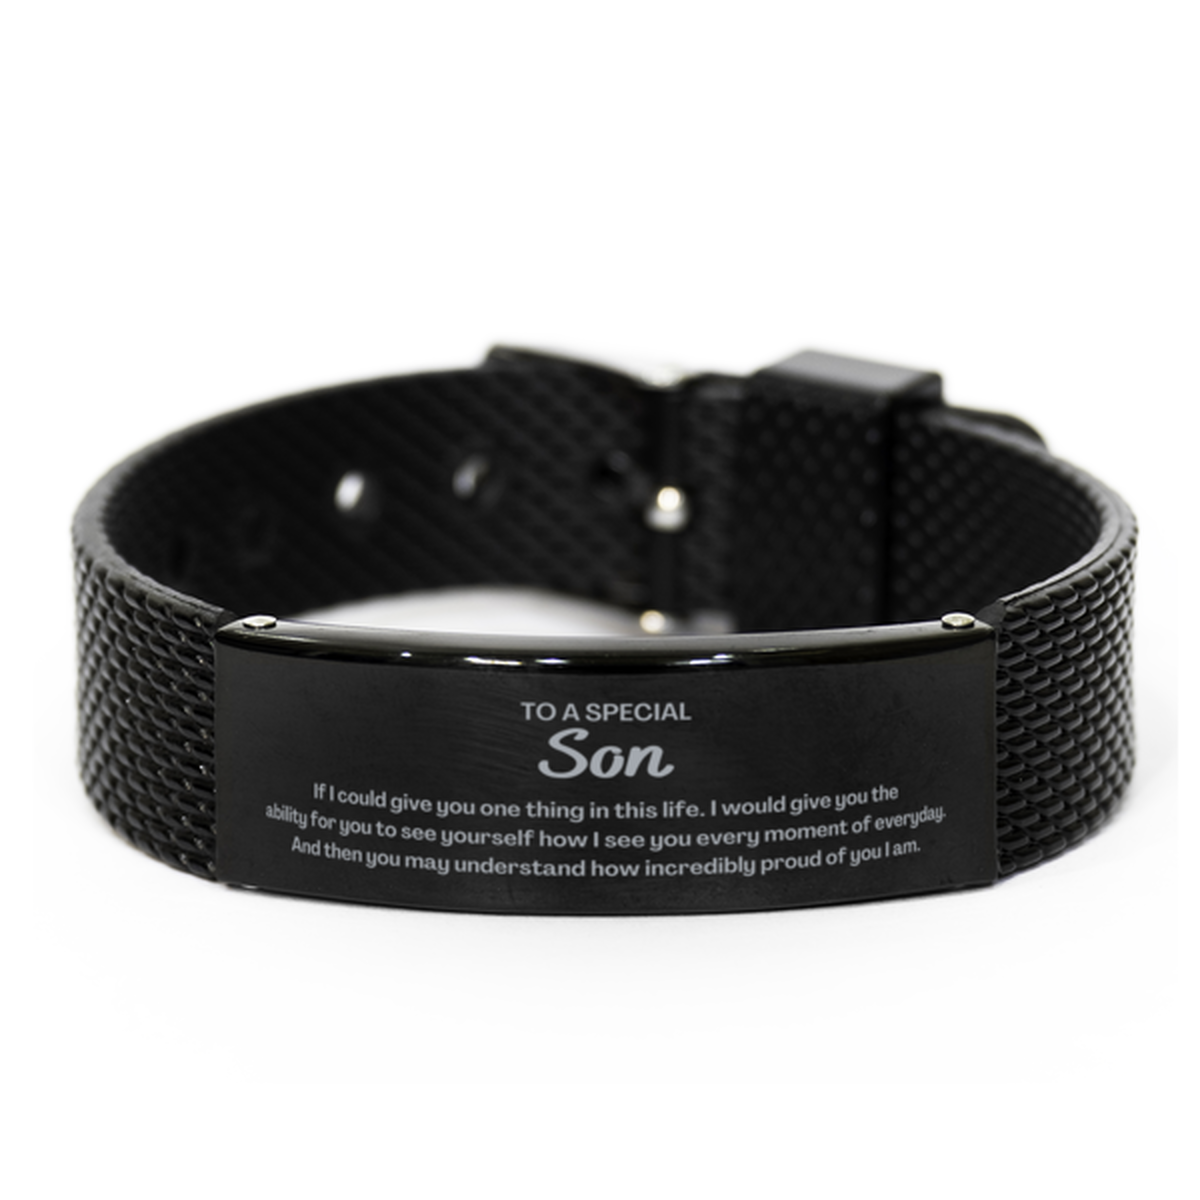 To My Son Black Shark Mesh Bracelet, Gifts For Son Engraved, Inspirational Gifts for Christmas Birthday, Epic Gifts for Son To A Special Son how incredibly proud of you I am